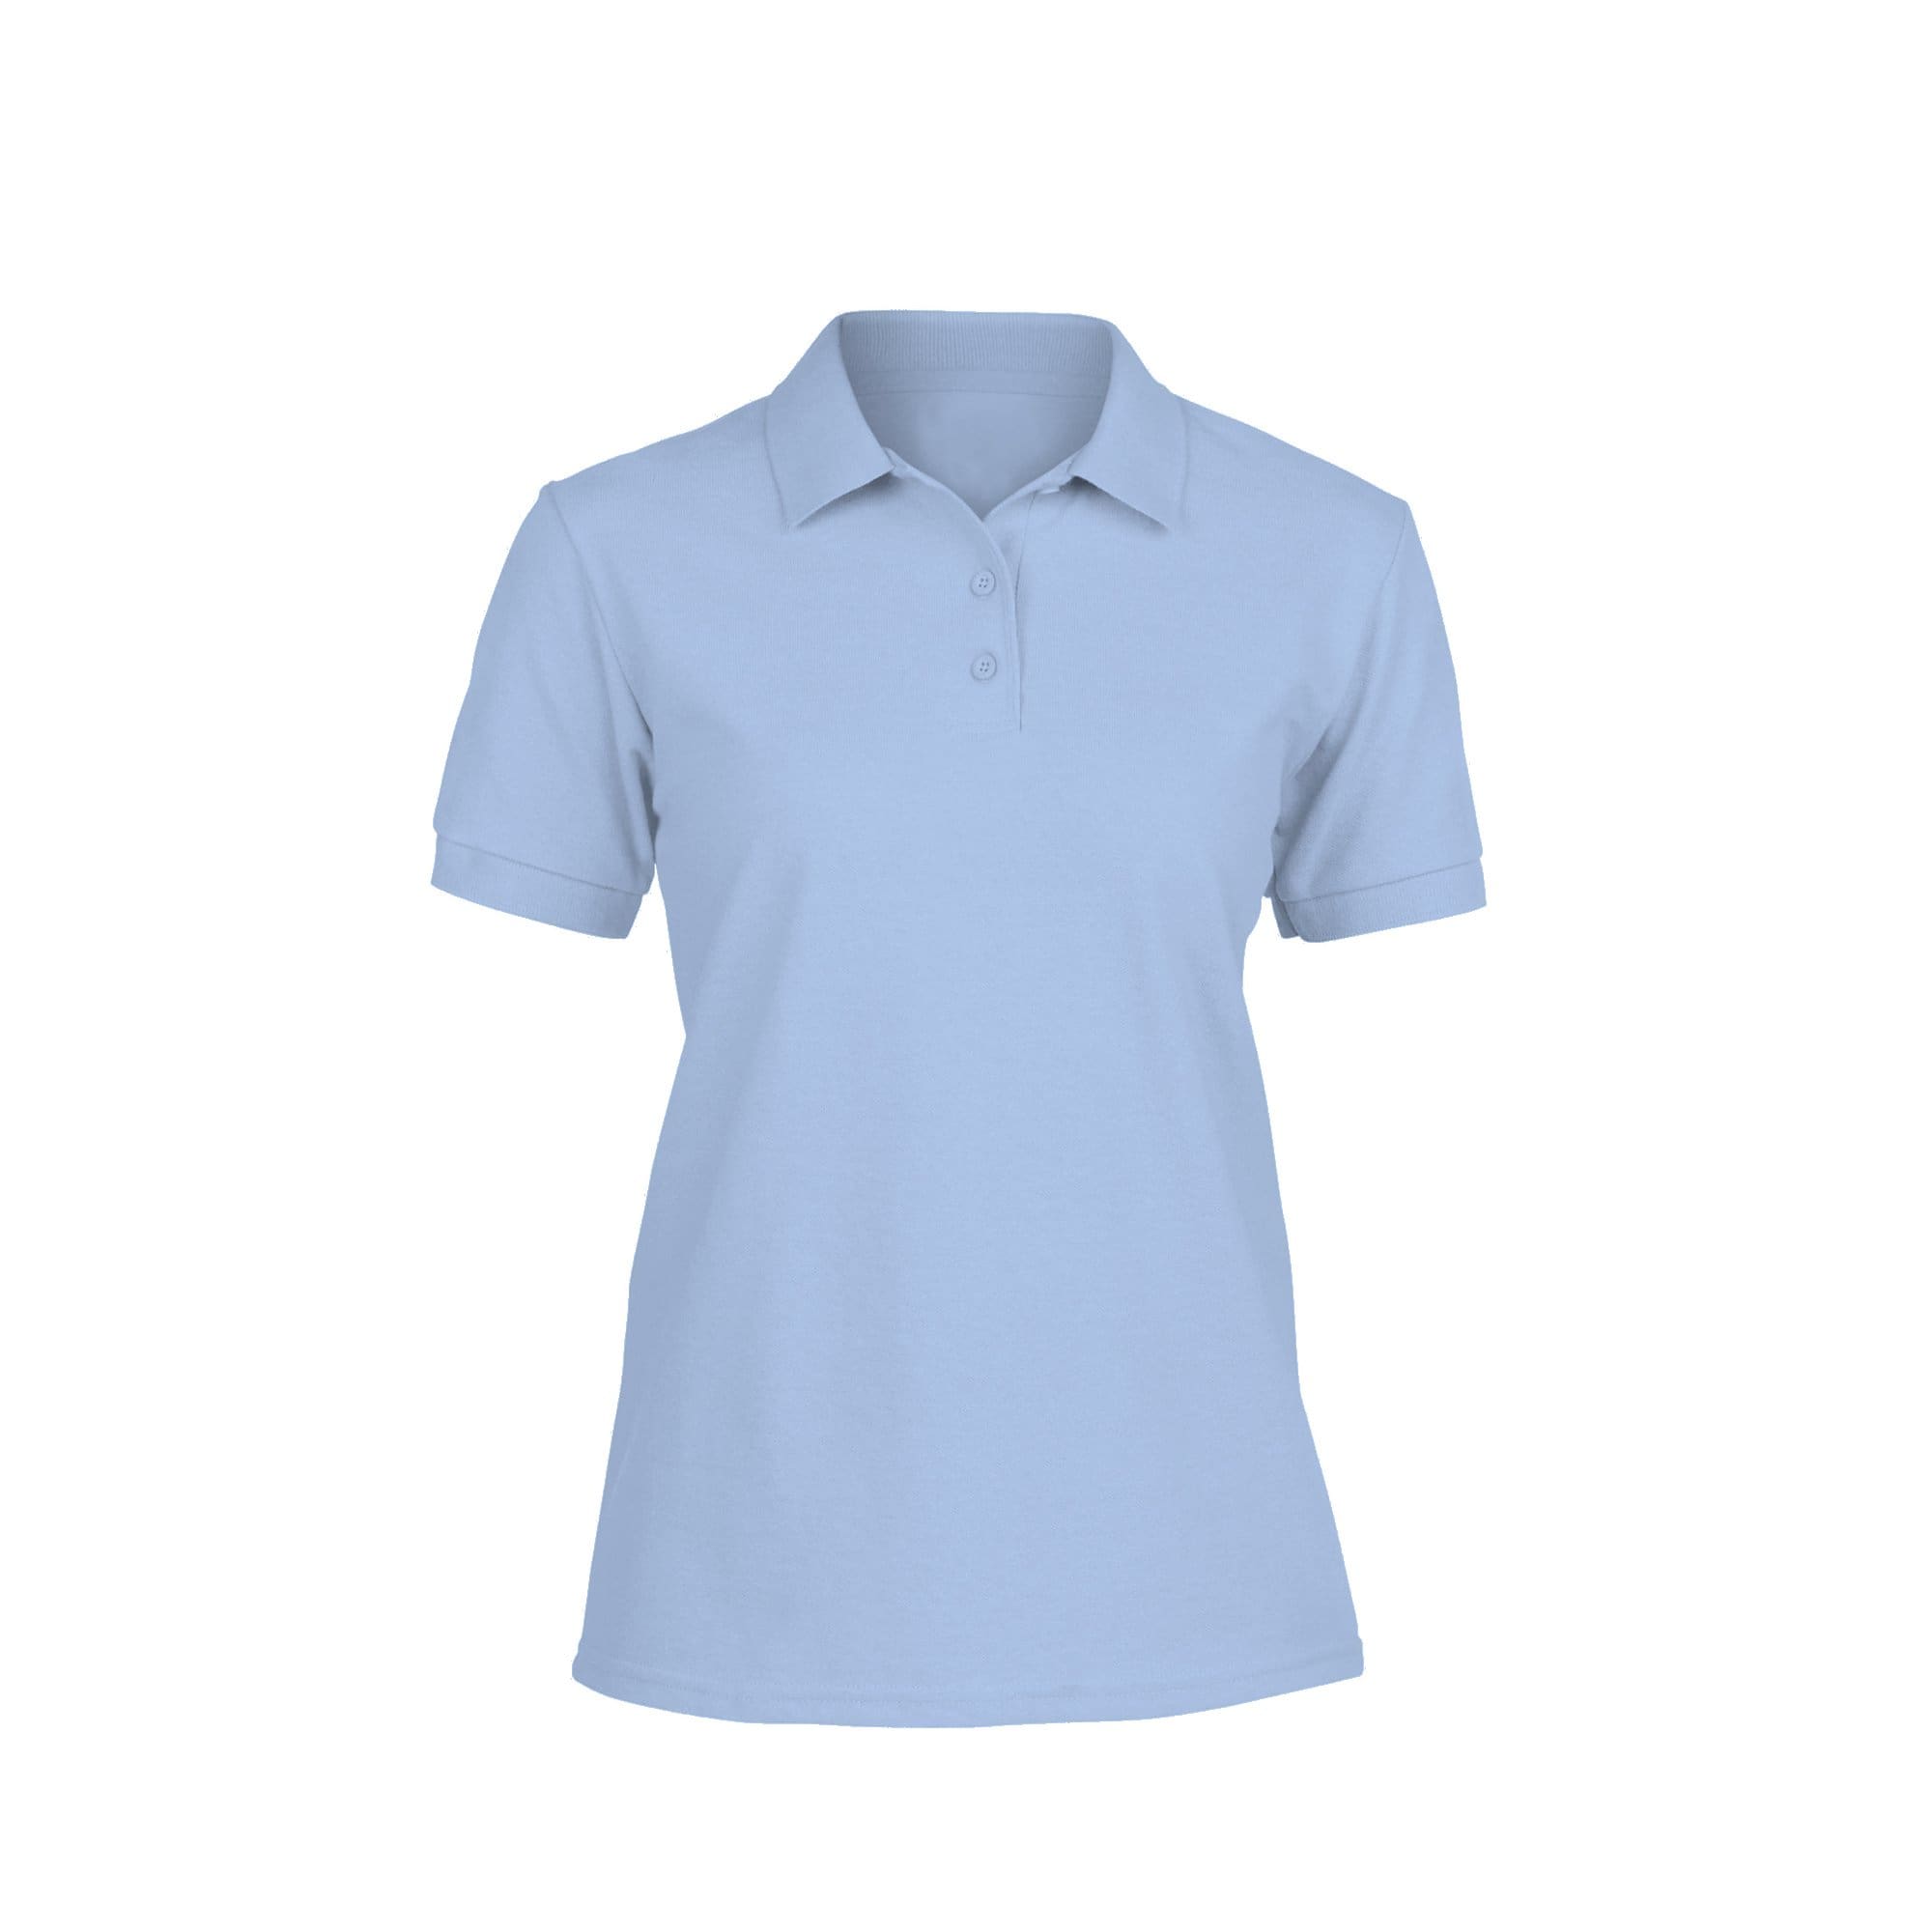 Ladies cotton polo shirt - for embroidery with your logo - Whistler